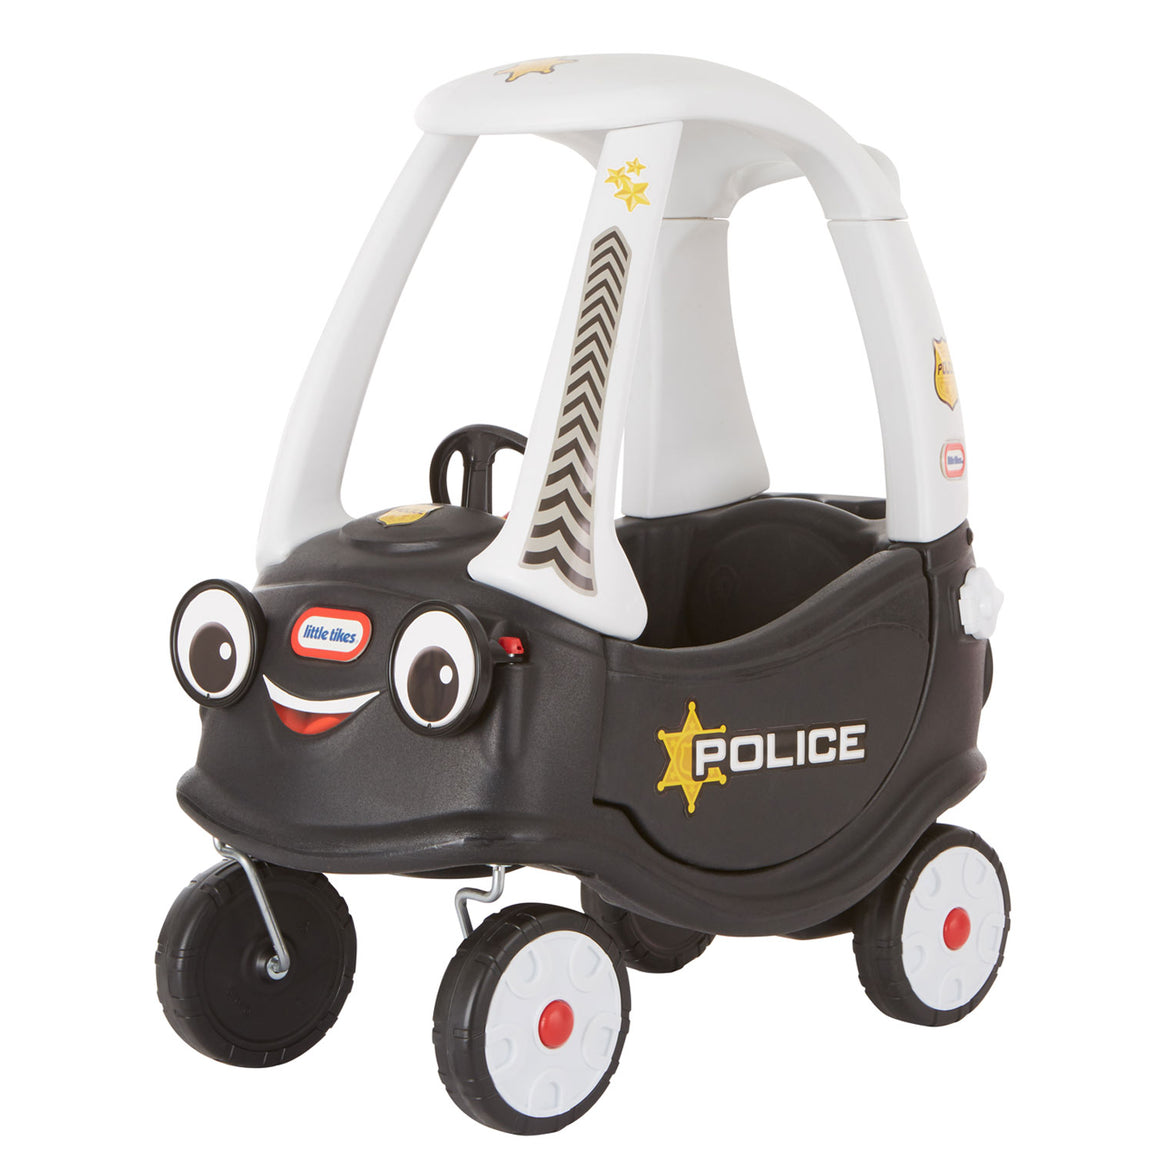 Police Cozy | Little Tikes – Official Little Tikes Website